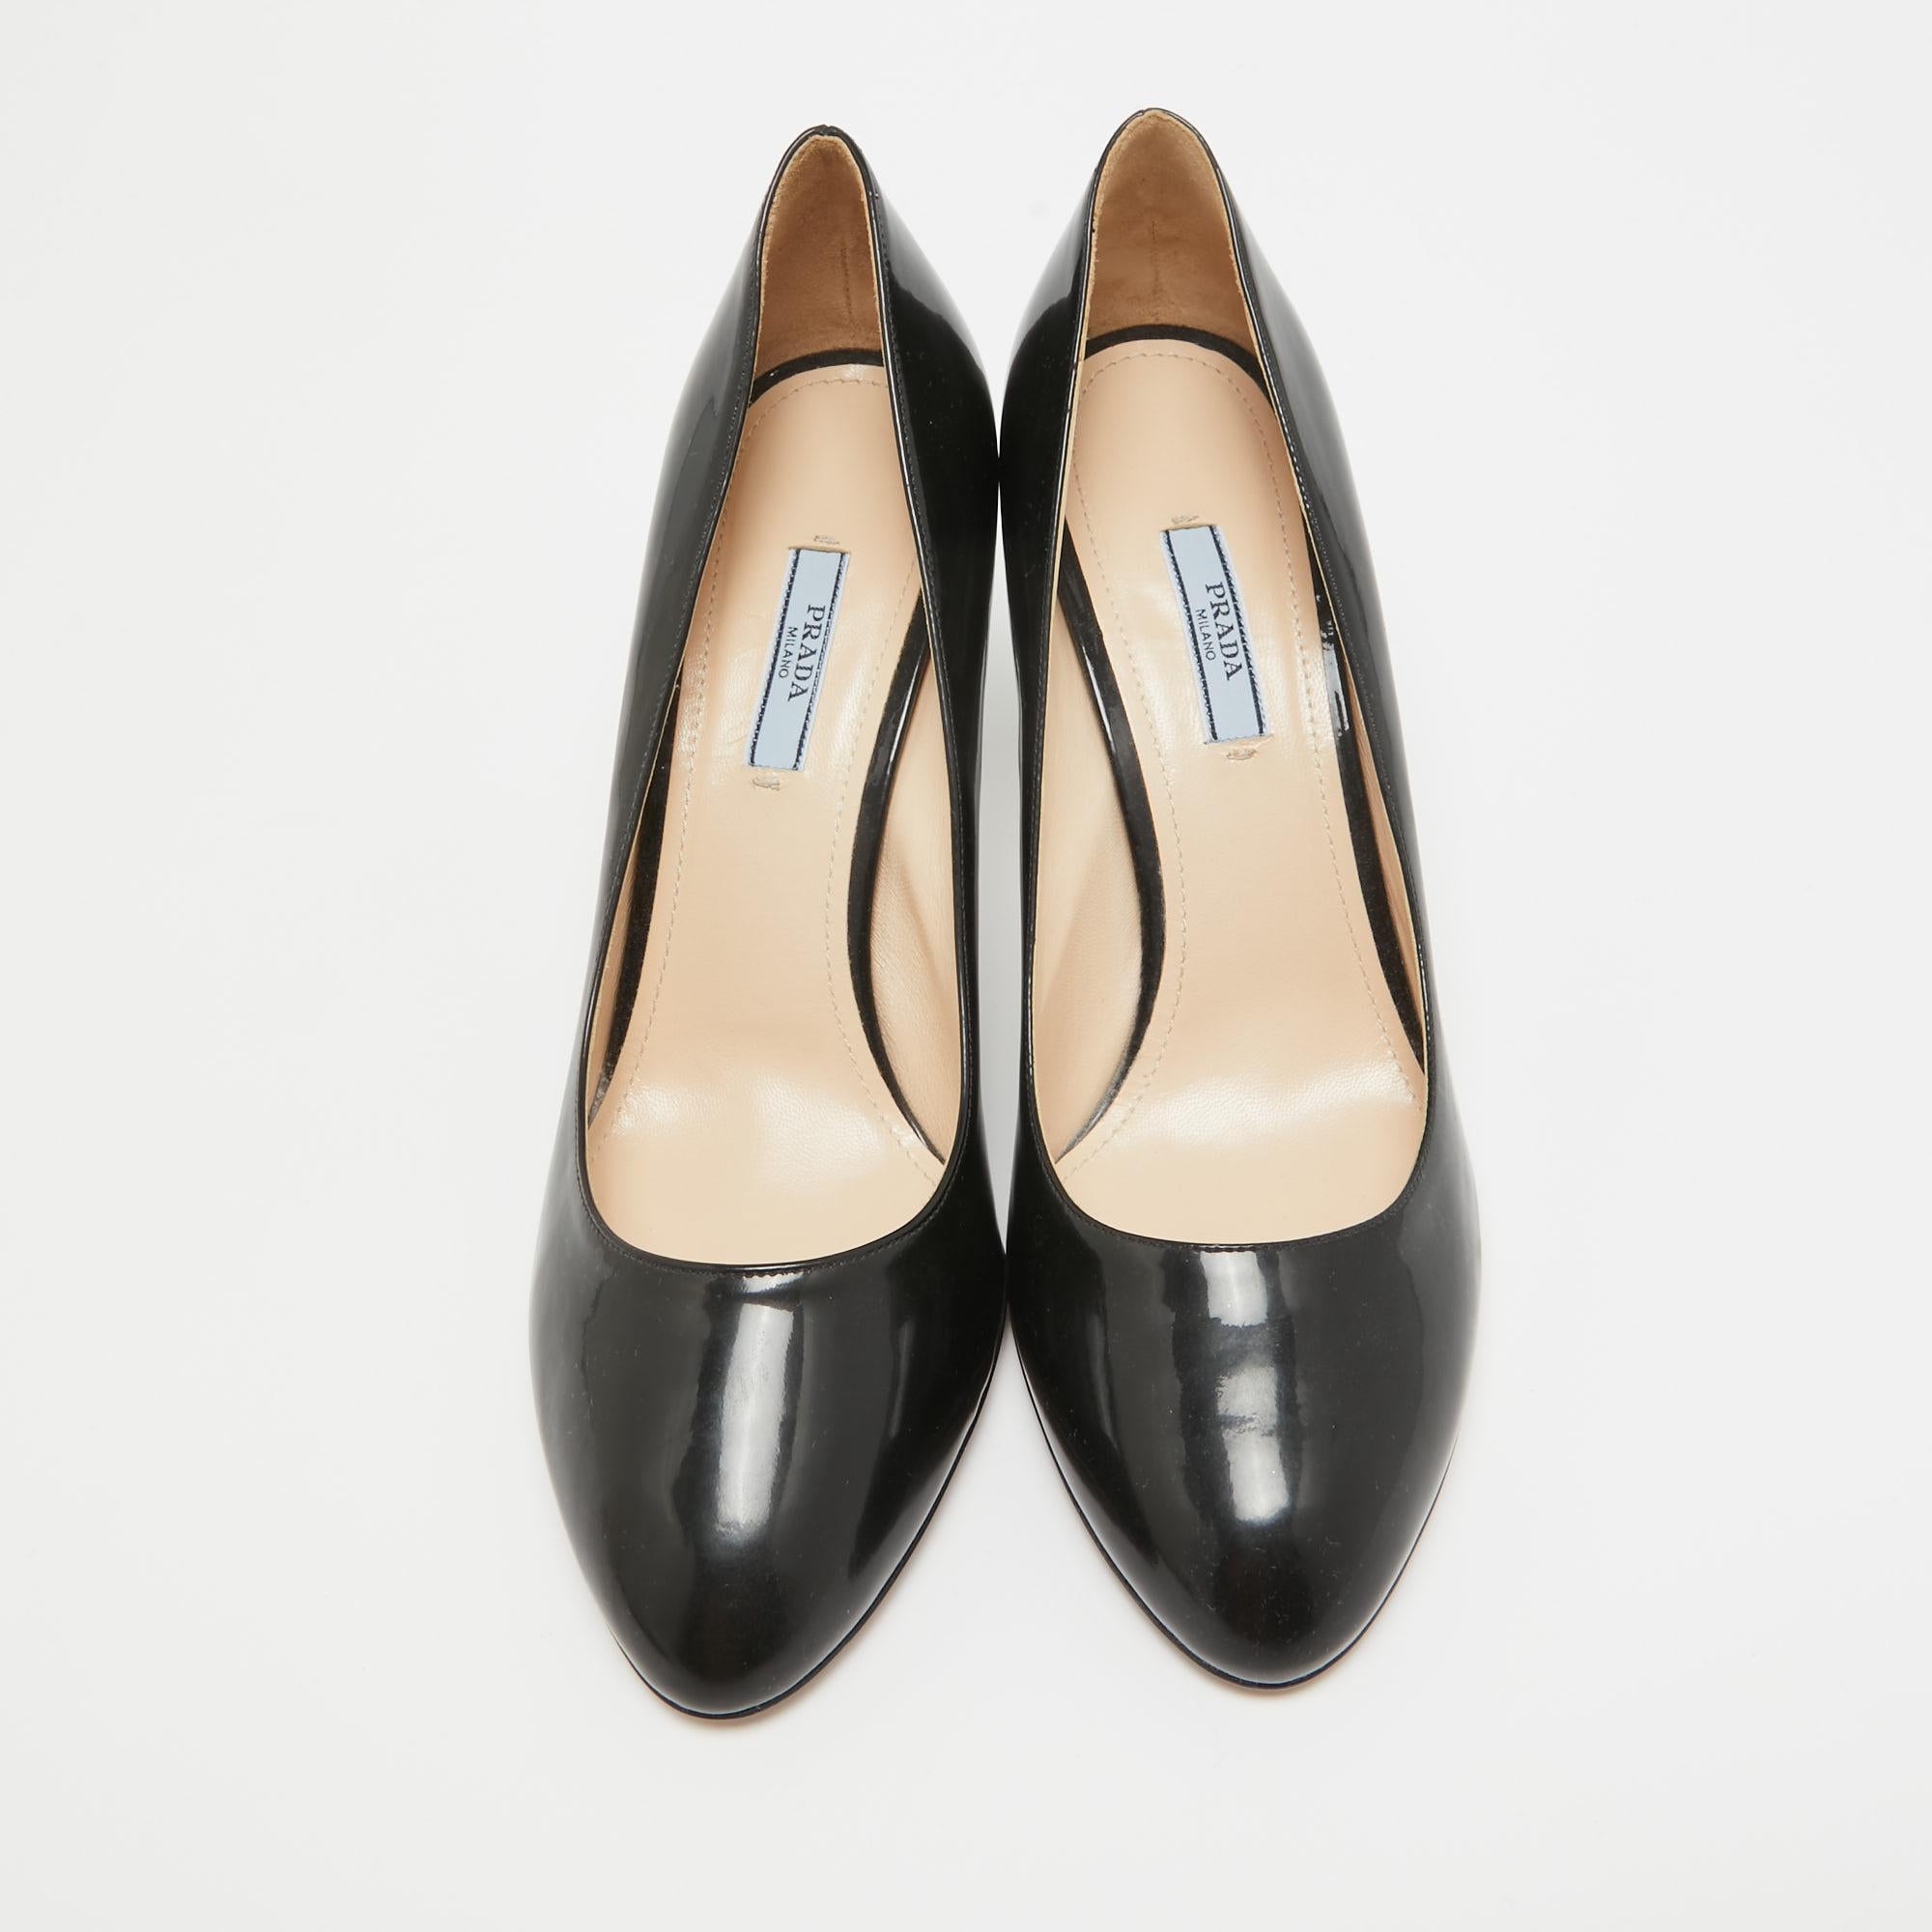 Exuding femininity and elegance, these pumps feature a chic silhouette with an attractive design. You can wear these pumps for a stylish look.

